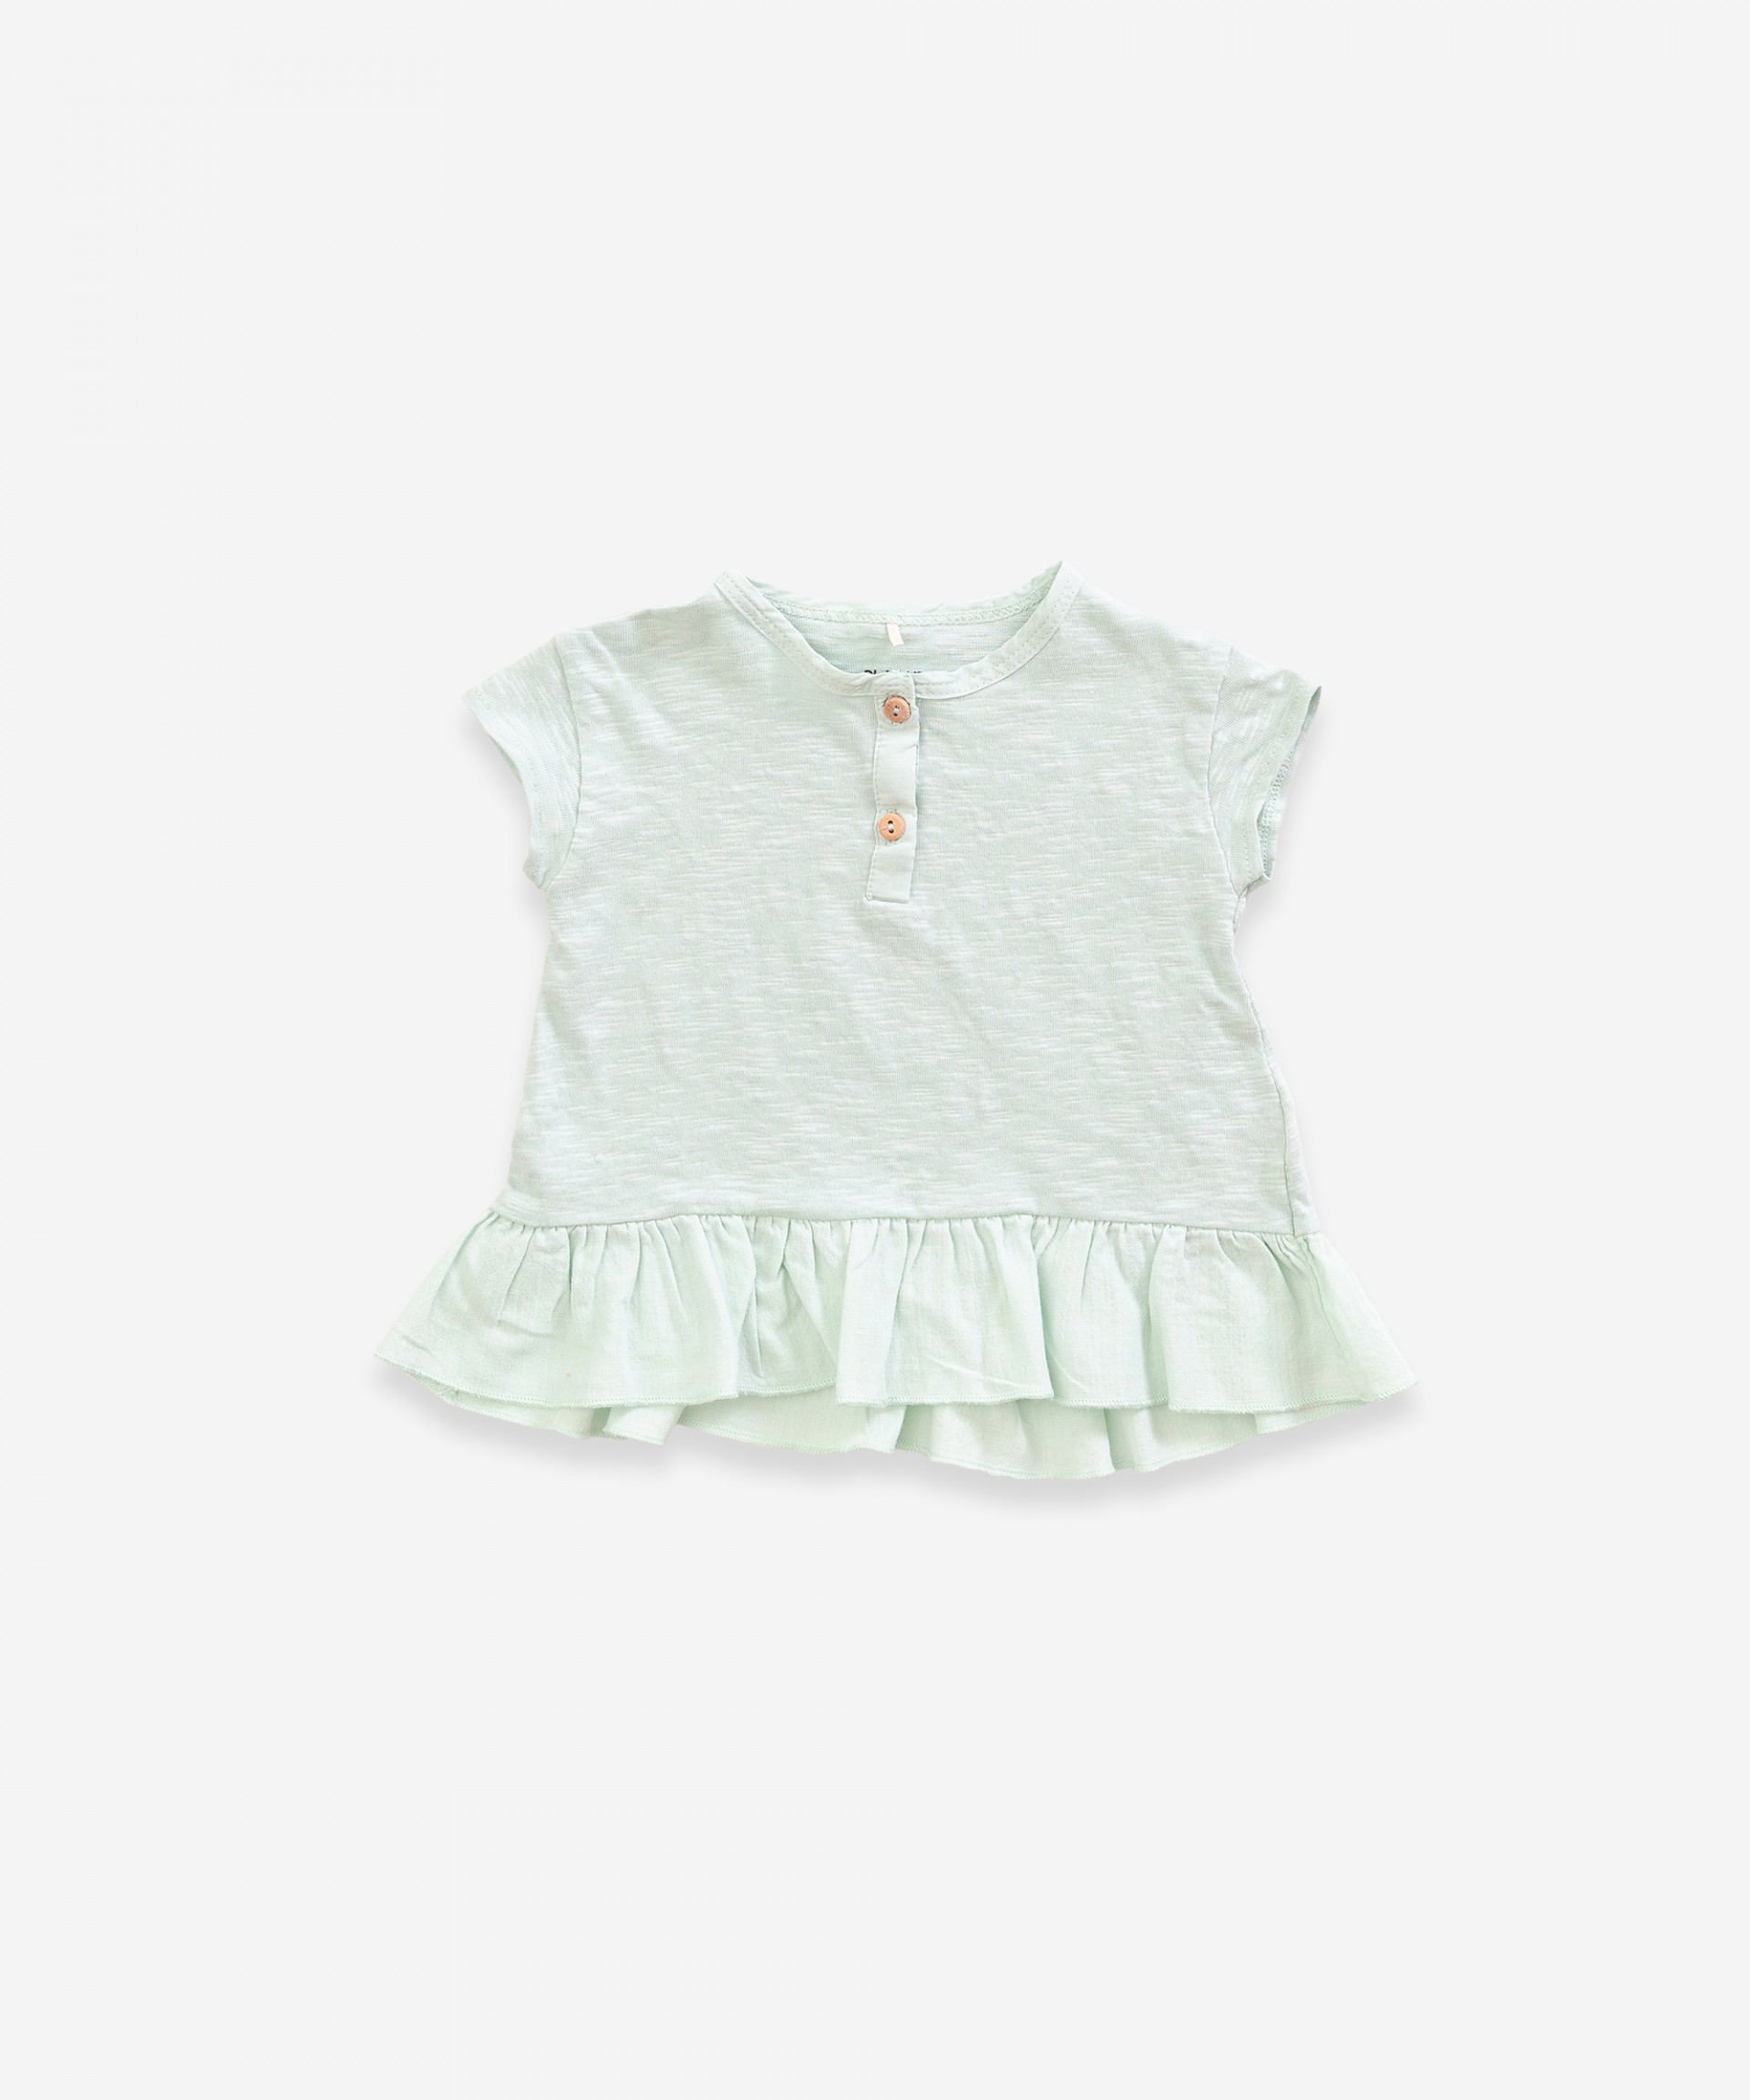 T-shirt with frill in organic cotton | Weaving | Weaving